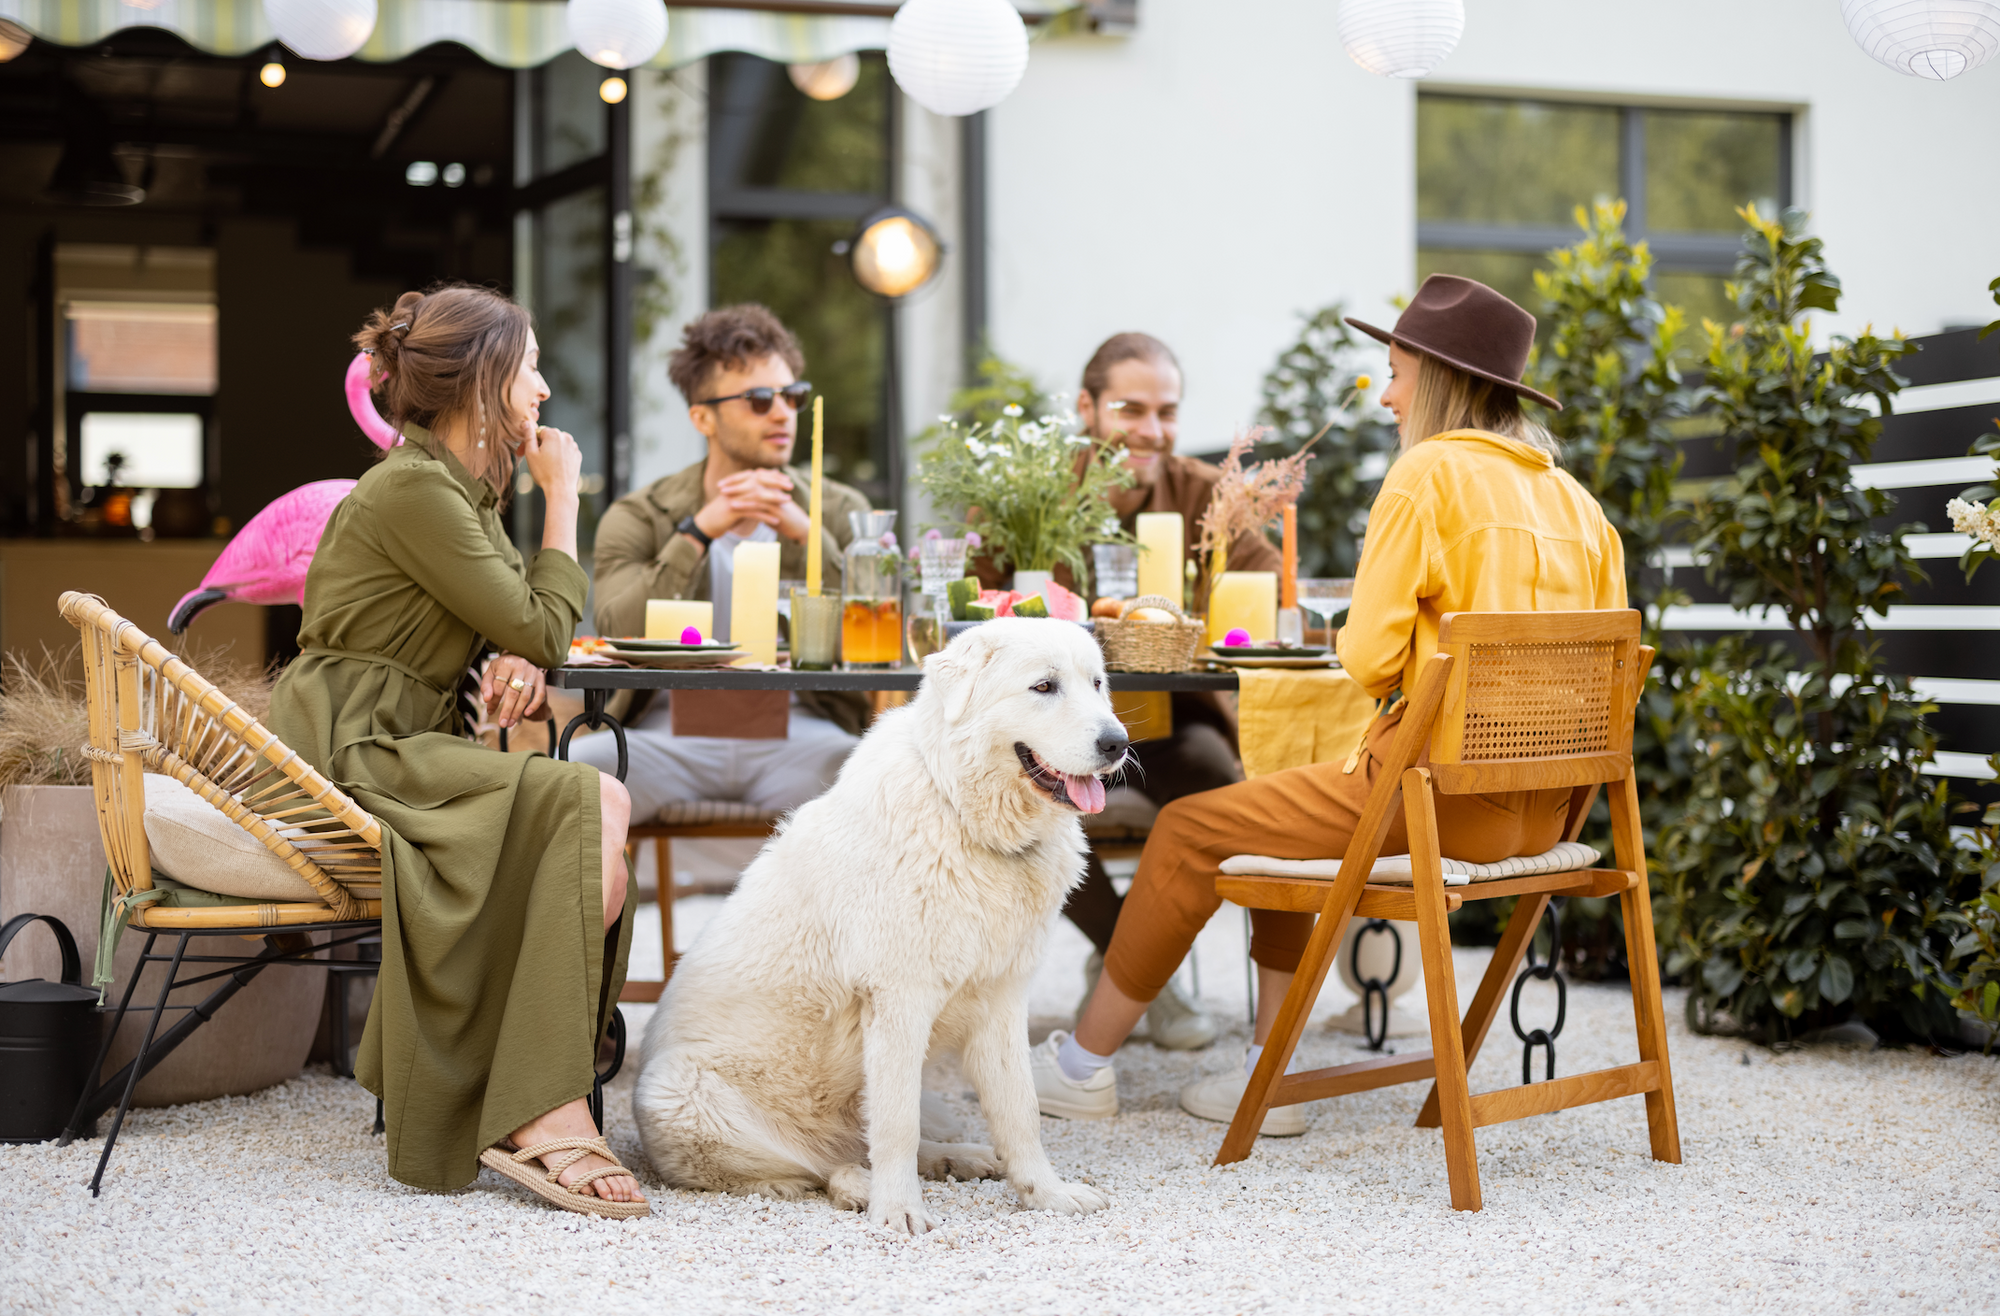 A group of people sitting at a table with a dog and a white dog sitting on the ground.